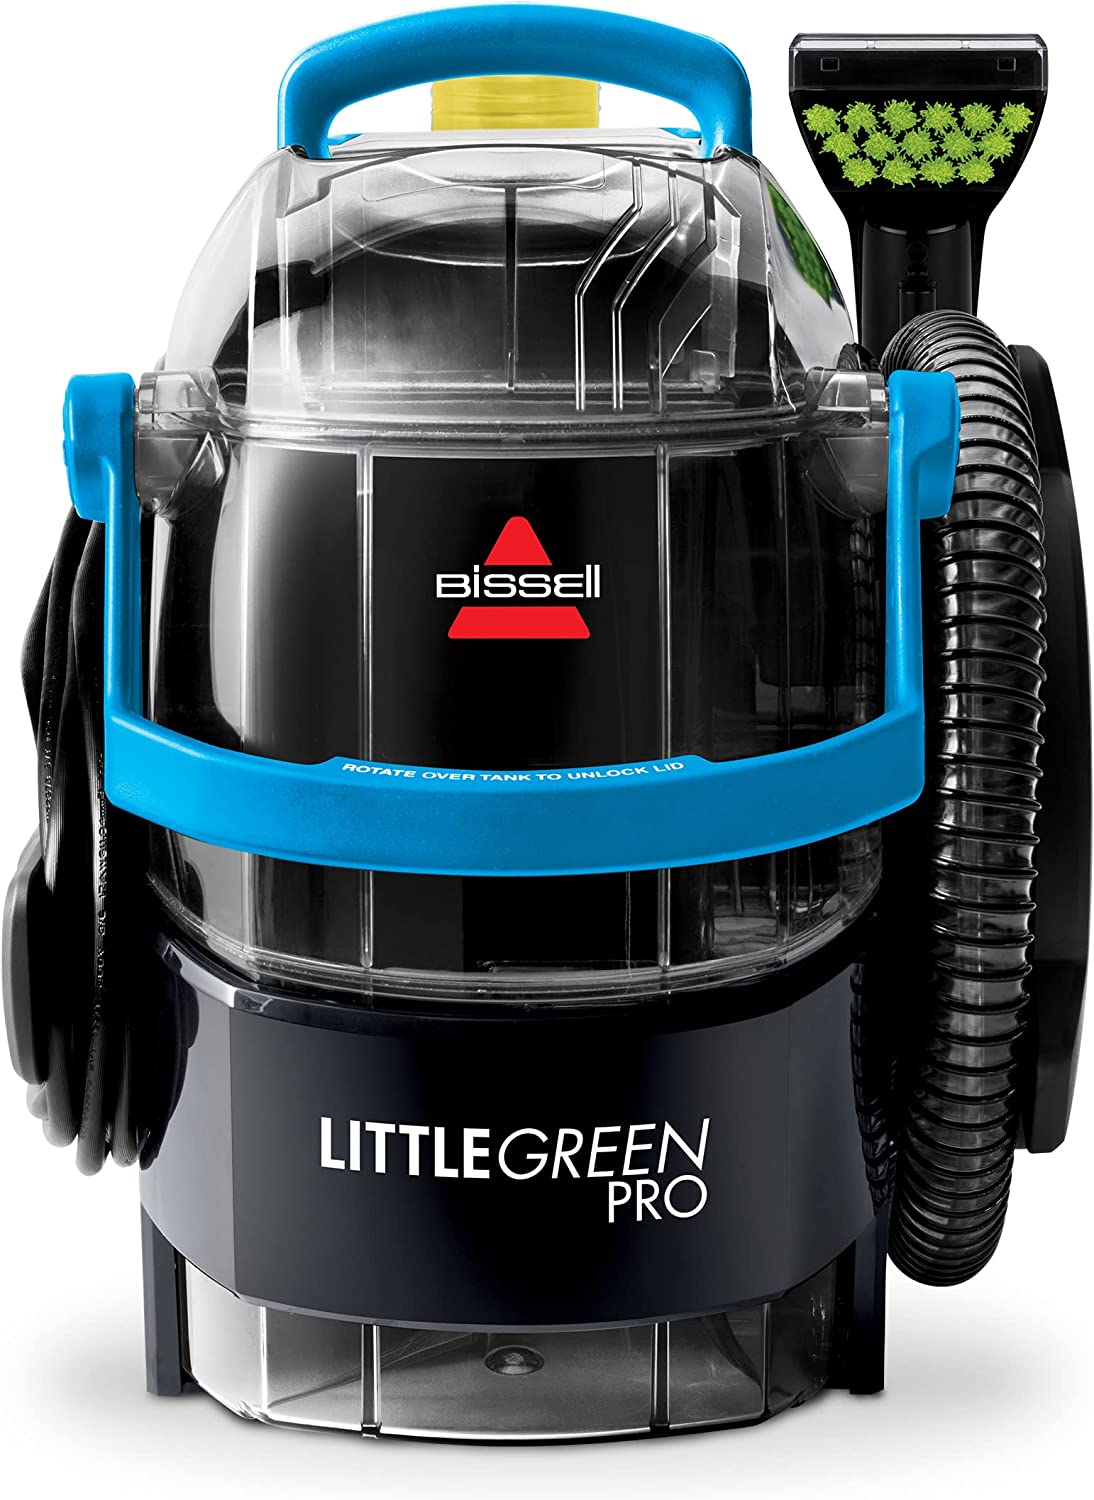 BISSELL Little Green Pro Portable Carpet & Upholstery [...]